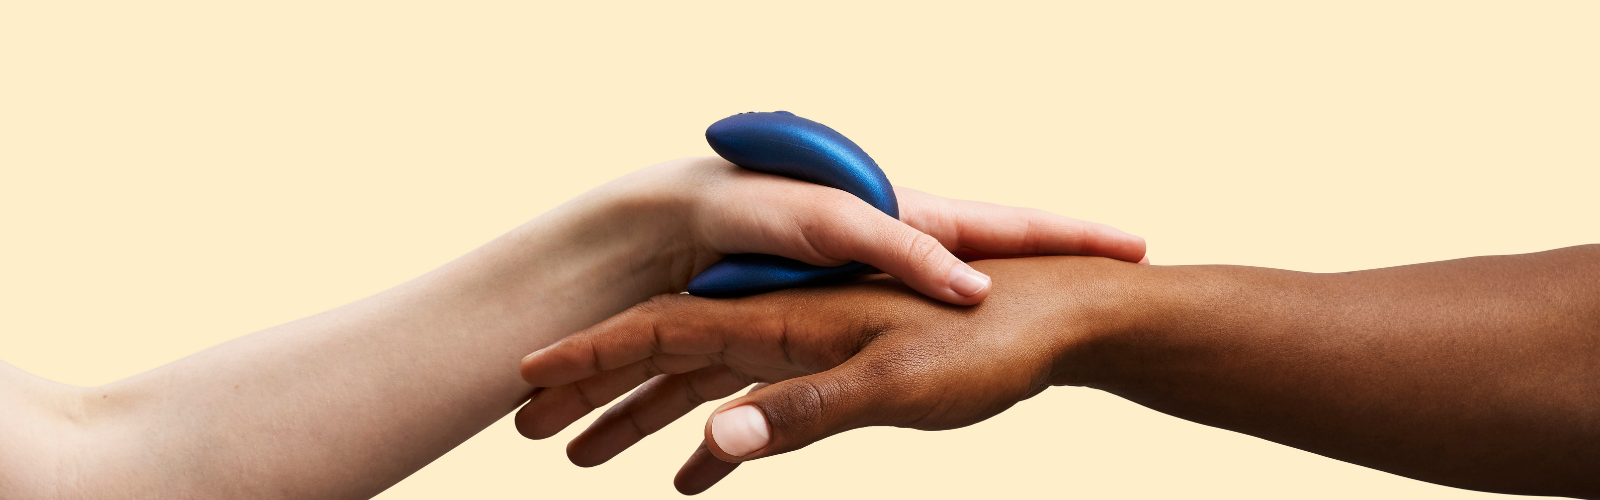 Intensify their connection with the We-Vibe Chorus.